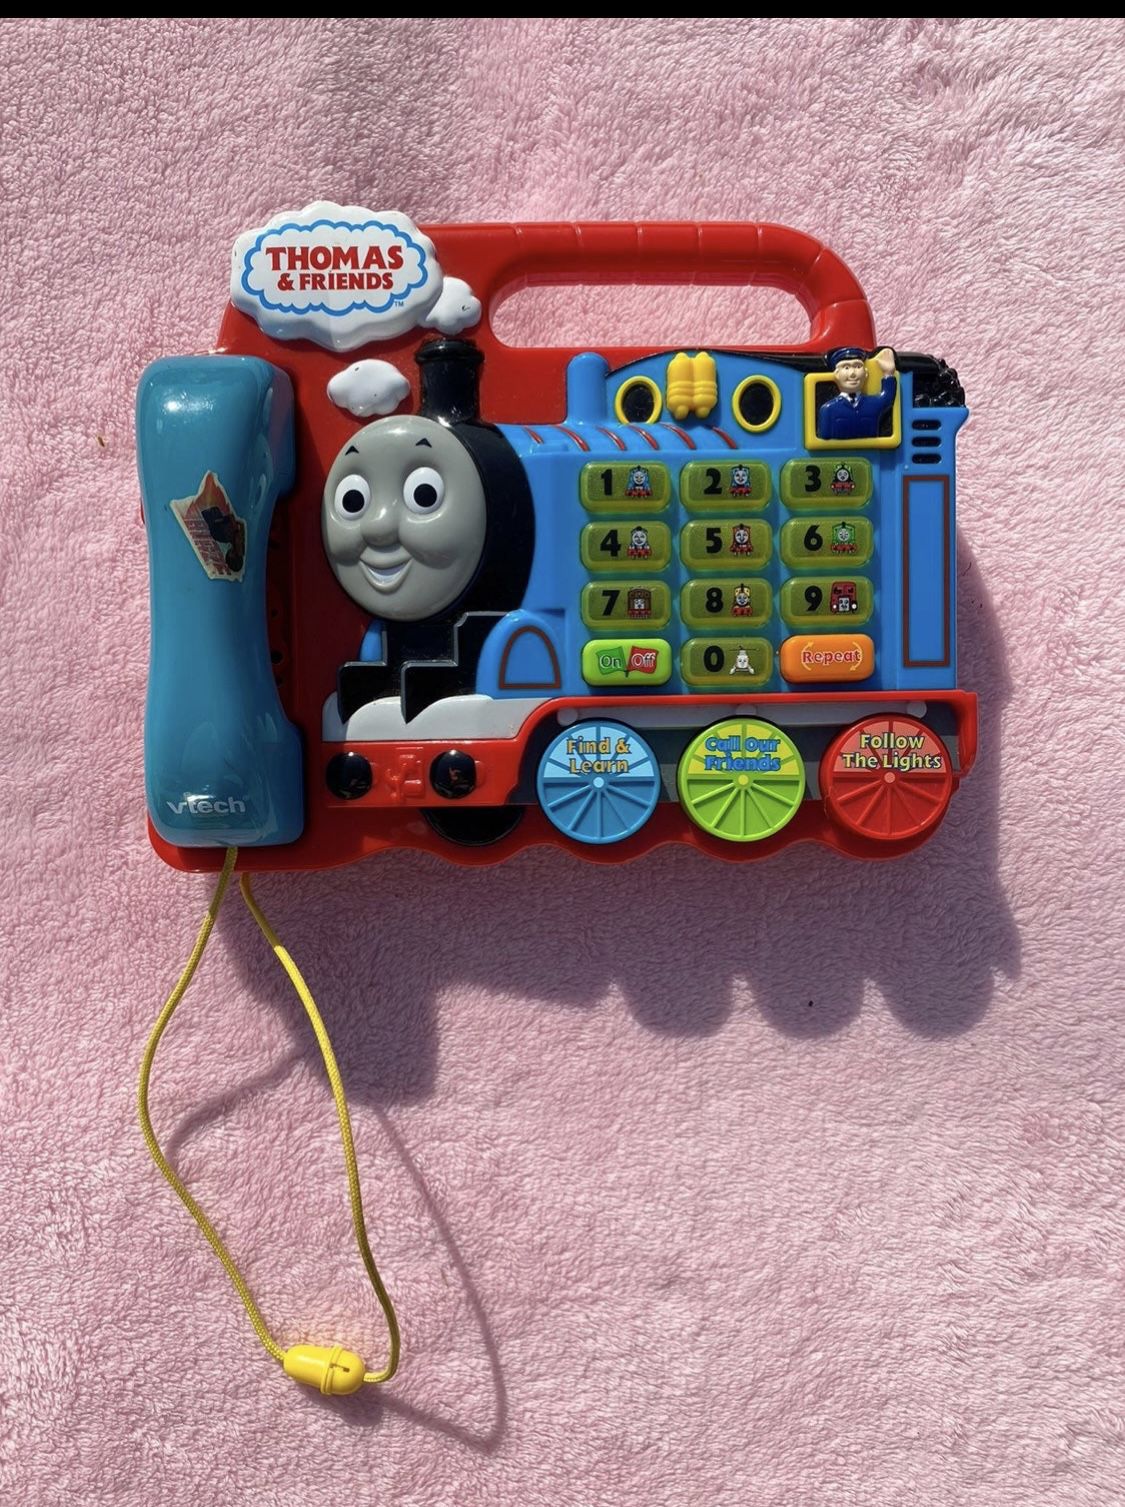 Vtech Thomas & Friends Calling All Friends Phone Find Learn Follow Lights Engine